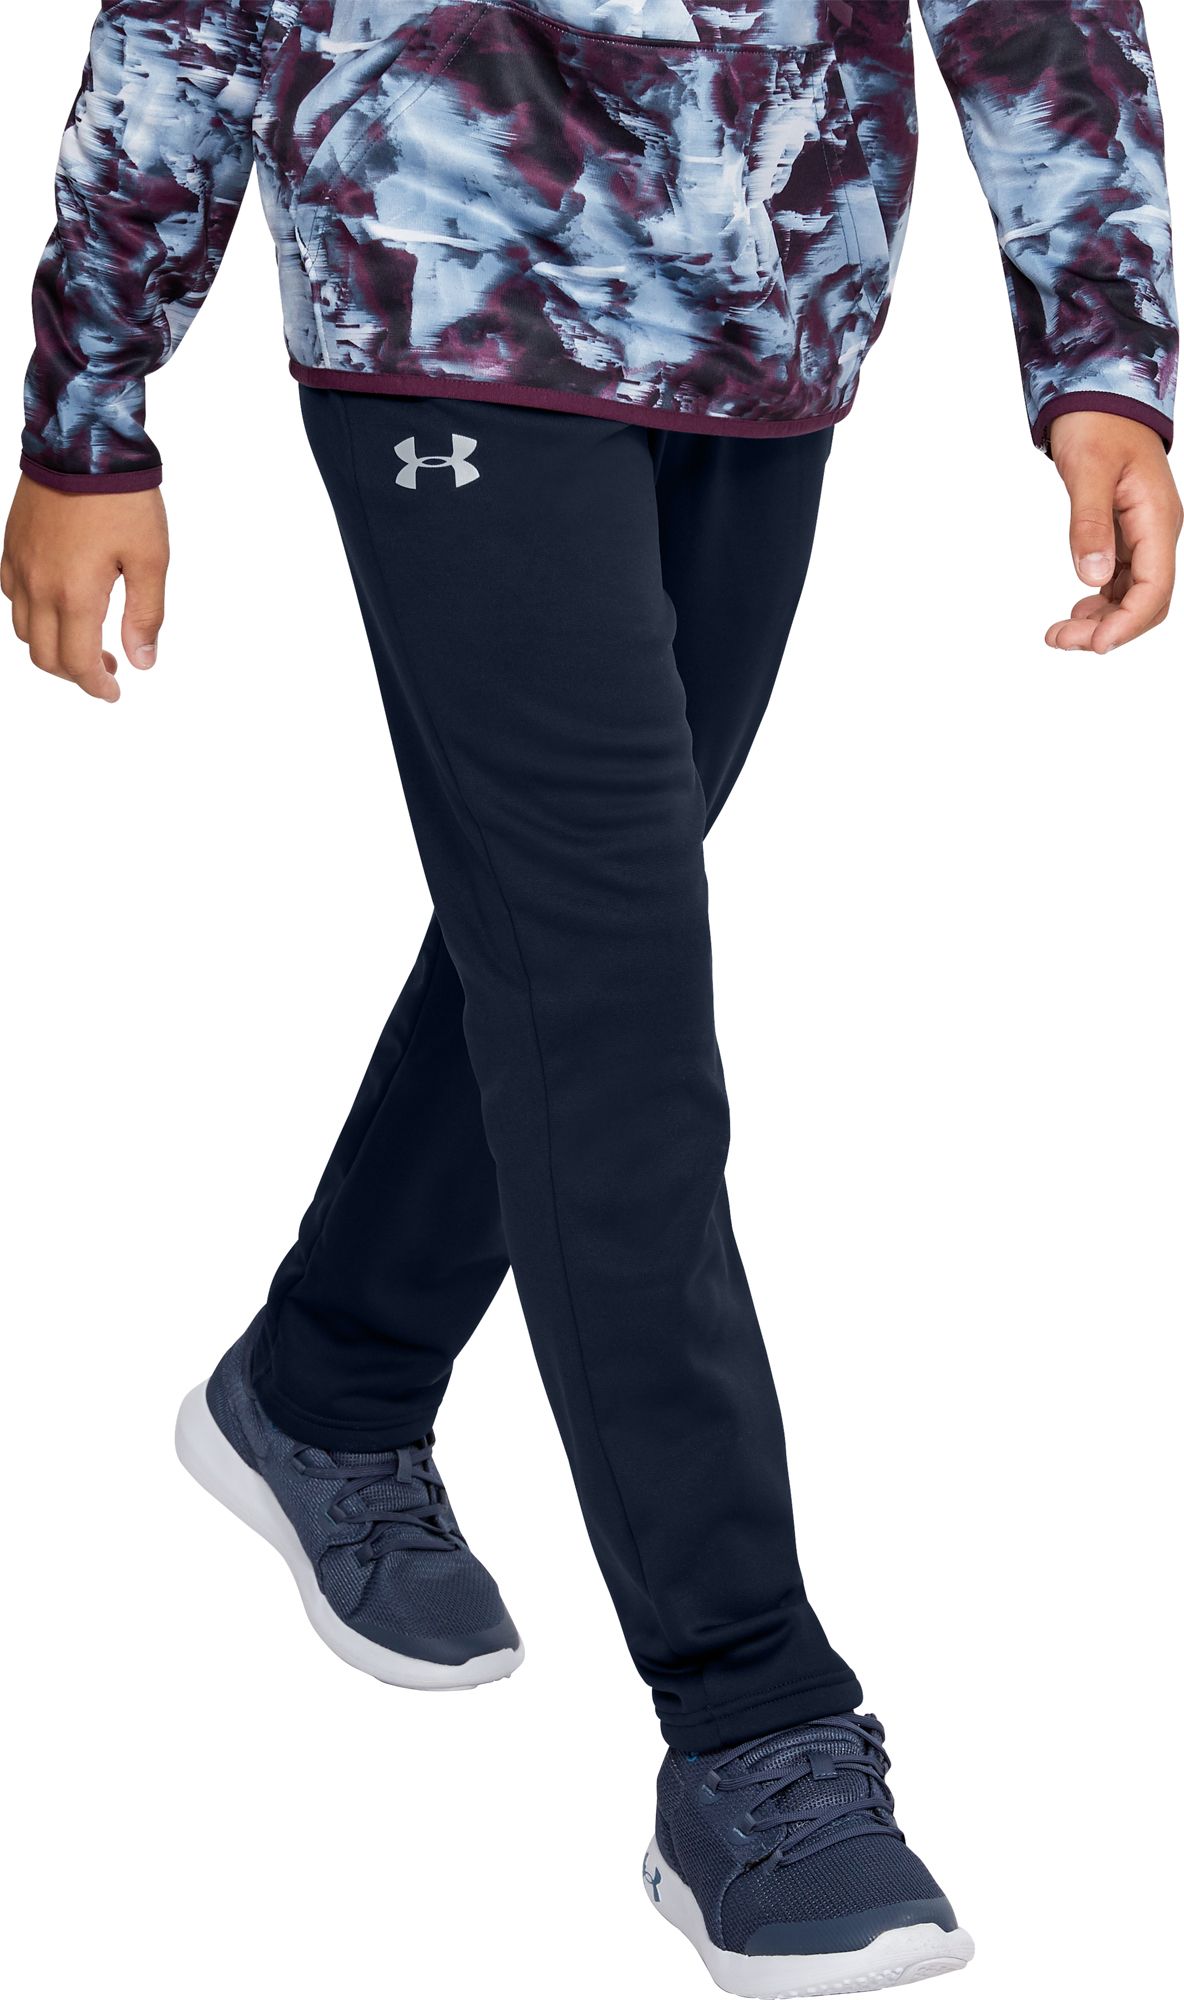 under armor youth pants